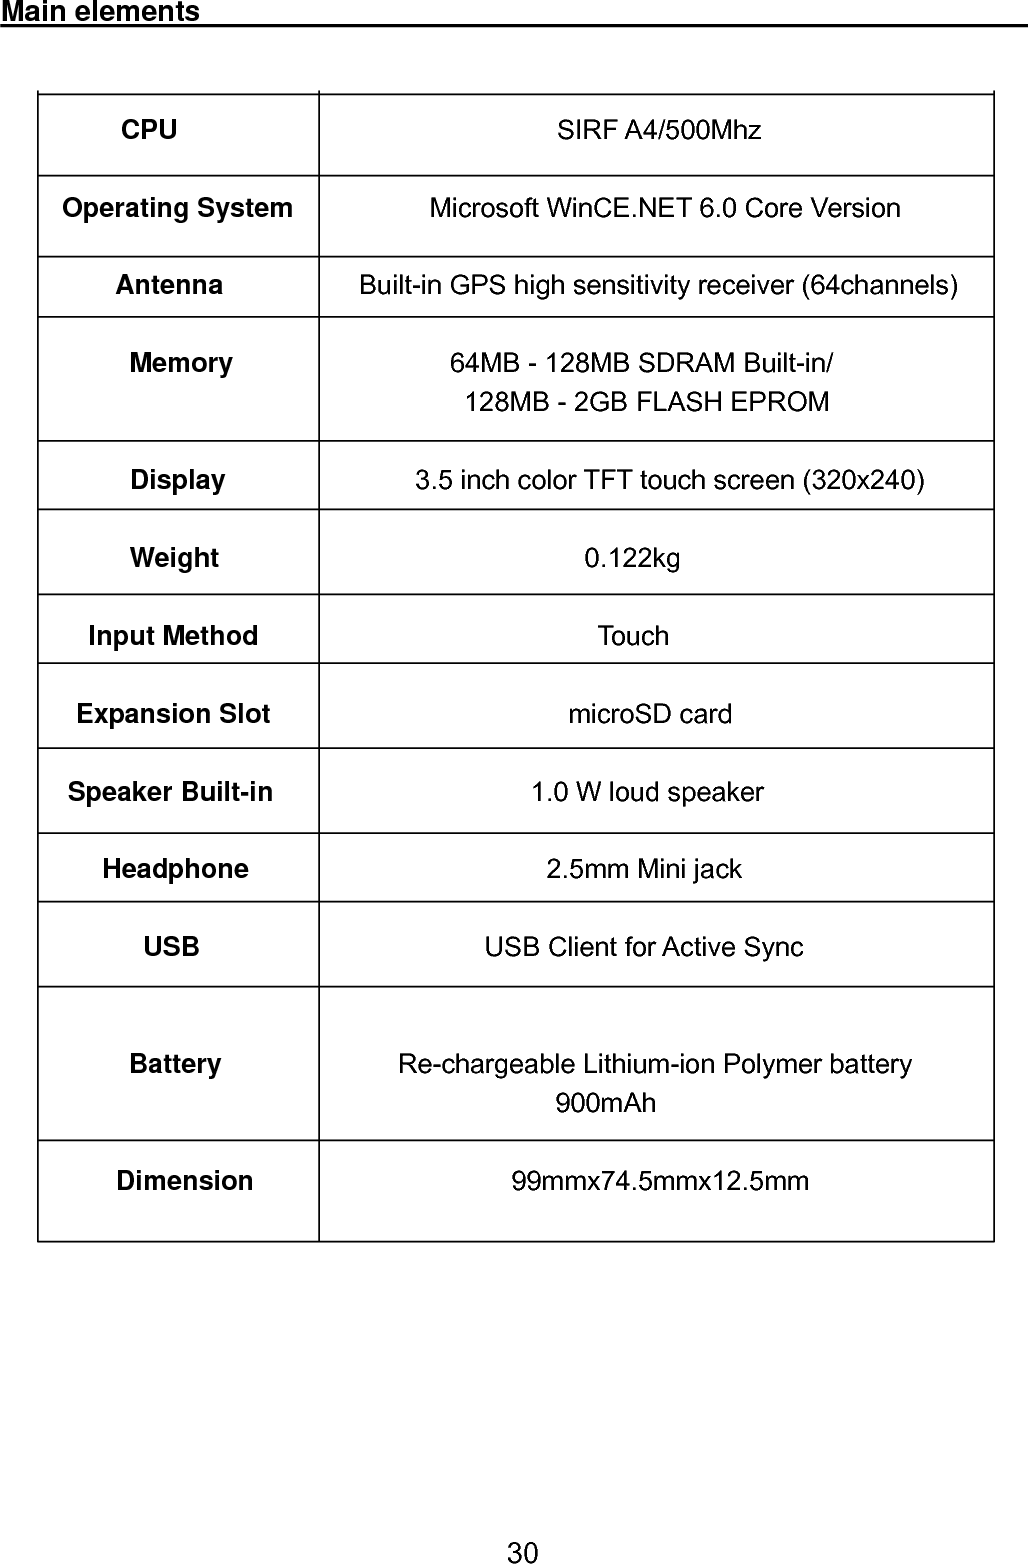  30Main elements                                                              CPU                            SIRF A4/500Mhz  Operating System          Microsoft WinCE.NET 6.0 Core Version  Antenna          Built-in GPS high sensitivity receiver (64channels)  Memory                64MB - 128MB SDRAM Built-in/ 128MB - 2GB FLASH EPROM  Display              3.5 inch color TFT touch screen (320x240)  Weight                           0.122kg  Input Method                         Touch  Expansion Slot                       microSD card  Speaker Built-in                   1.0 W loud speaker  Headphone                      2.5mm Mini jack  USB                      USB Client for Active Sync   Battery             Re-chargeable Lithium-ion Polymer battery                                          900mAh  Dimension                   99mmx74.5mmx12.5mm        